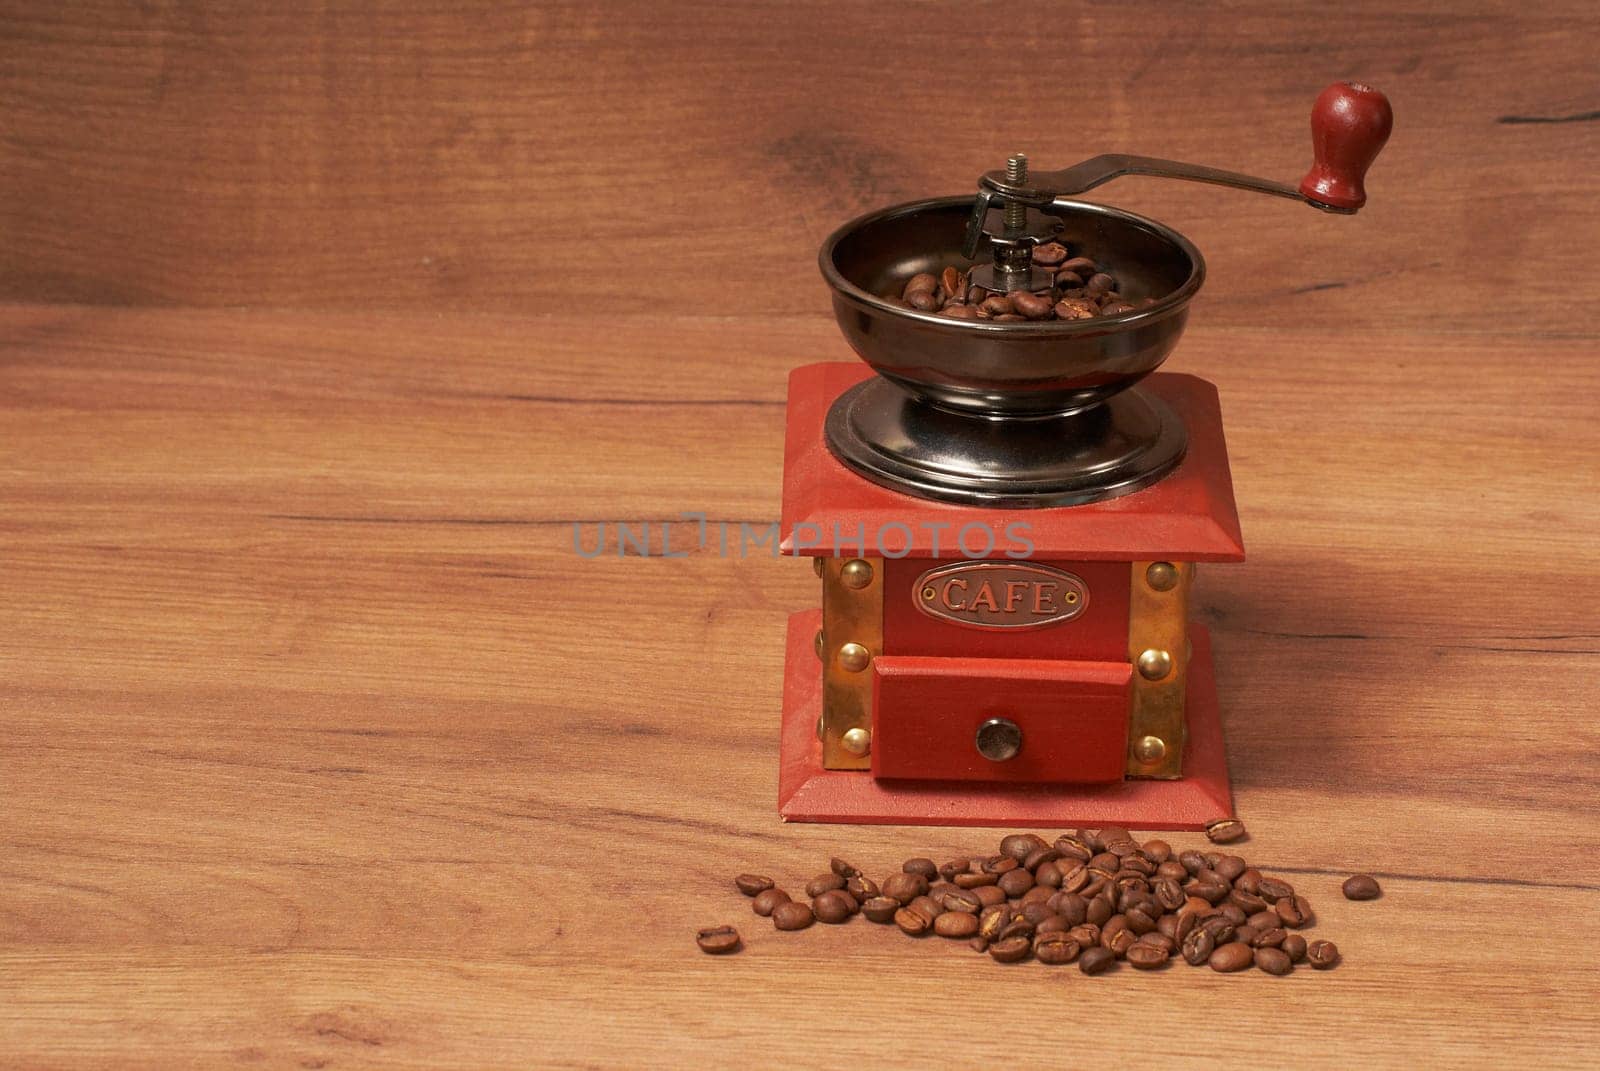 Manual coffee grinder for grinding coffee beans on a wooden surface by Севостьянов